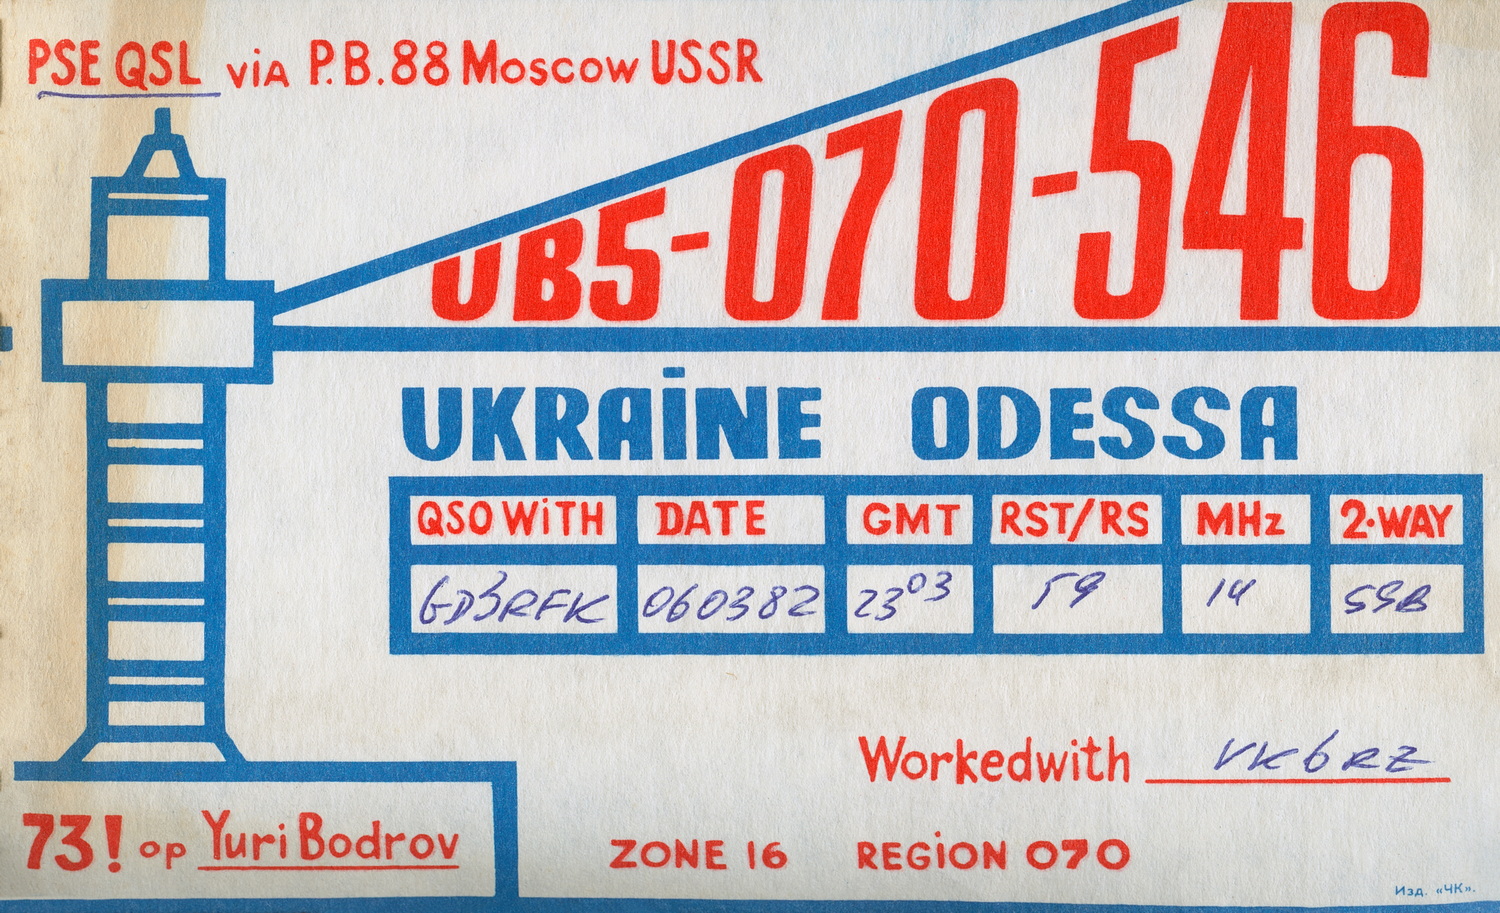 UB5-070-546 was Monitoring a QSO between Douglas and VK6RZ on 6th March 1982, and a Bonus, it's from Ukraine.